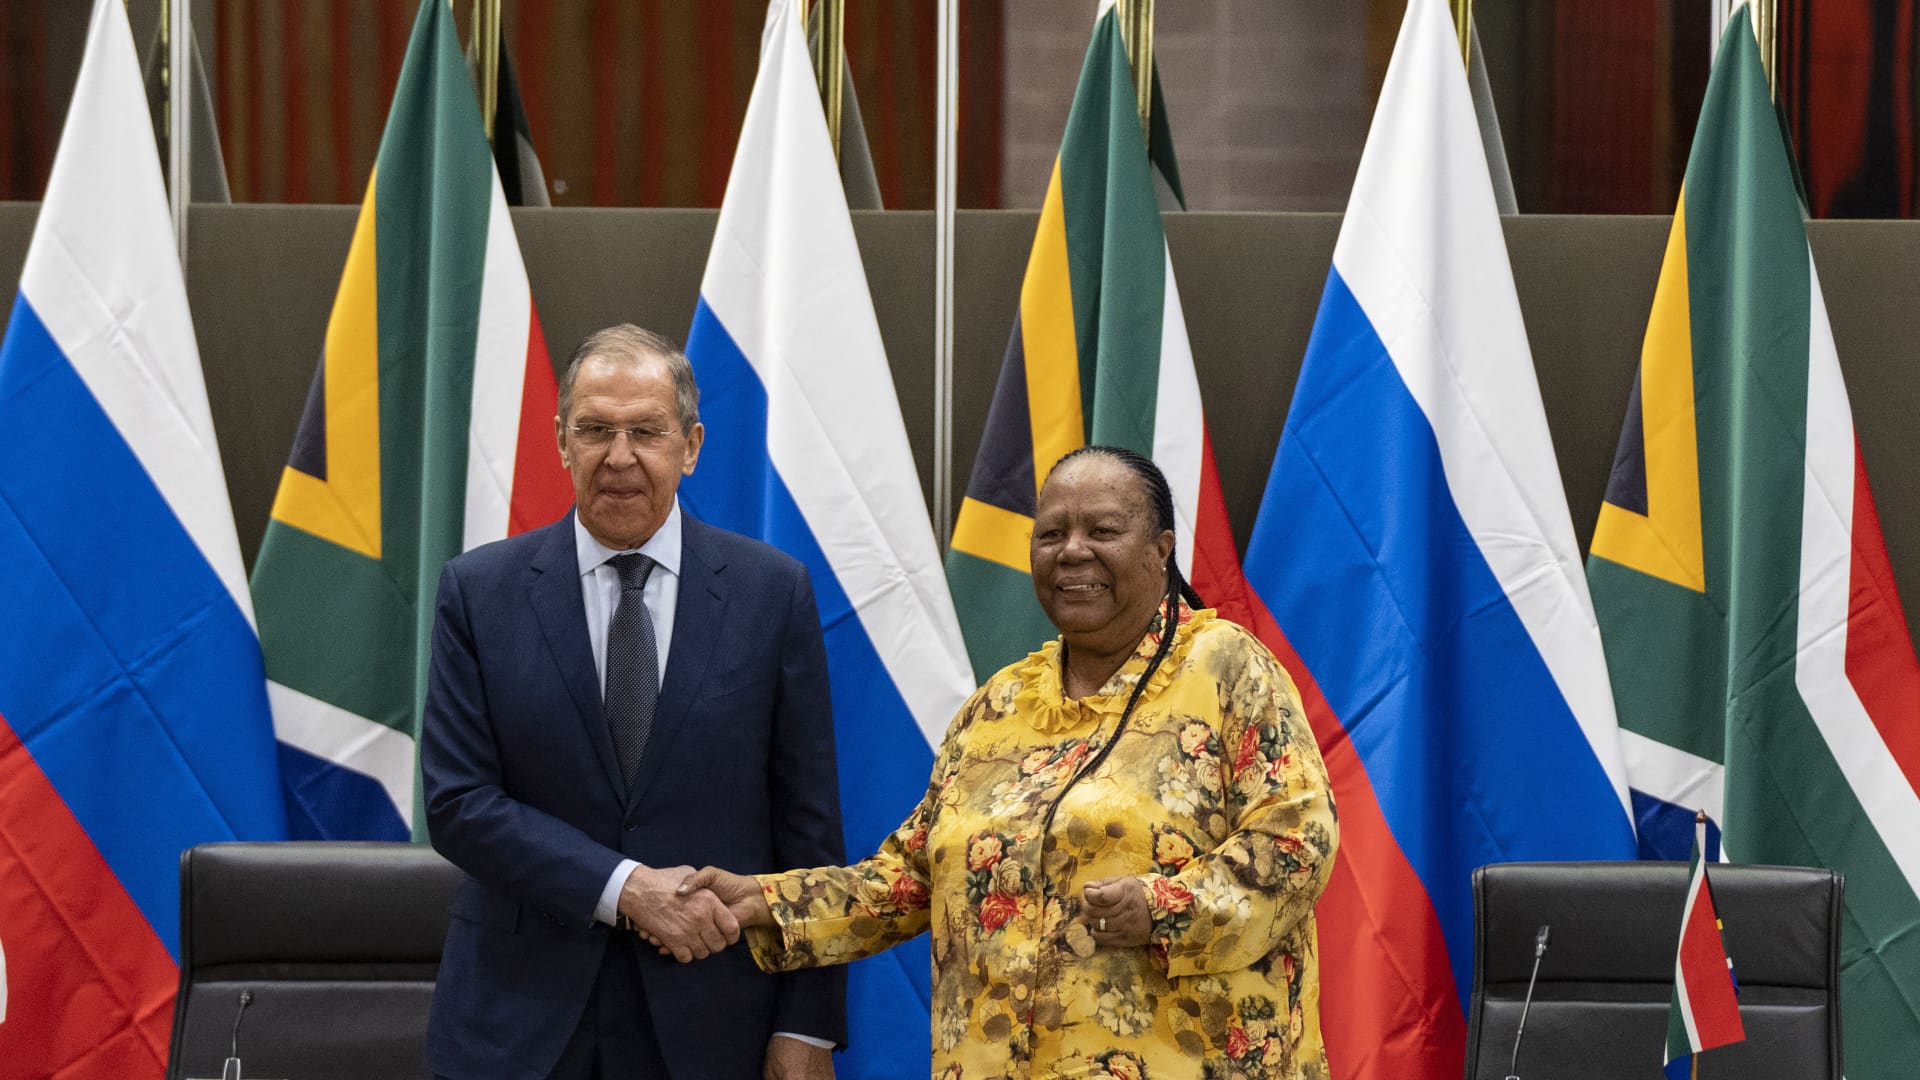 Russia, South Africa and a 'redesigned global order': The Kremlin's hearts and minds machine is steaming ahead